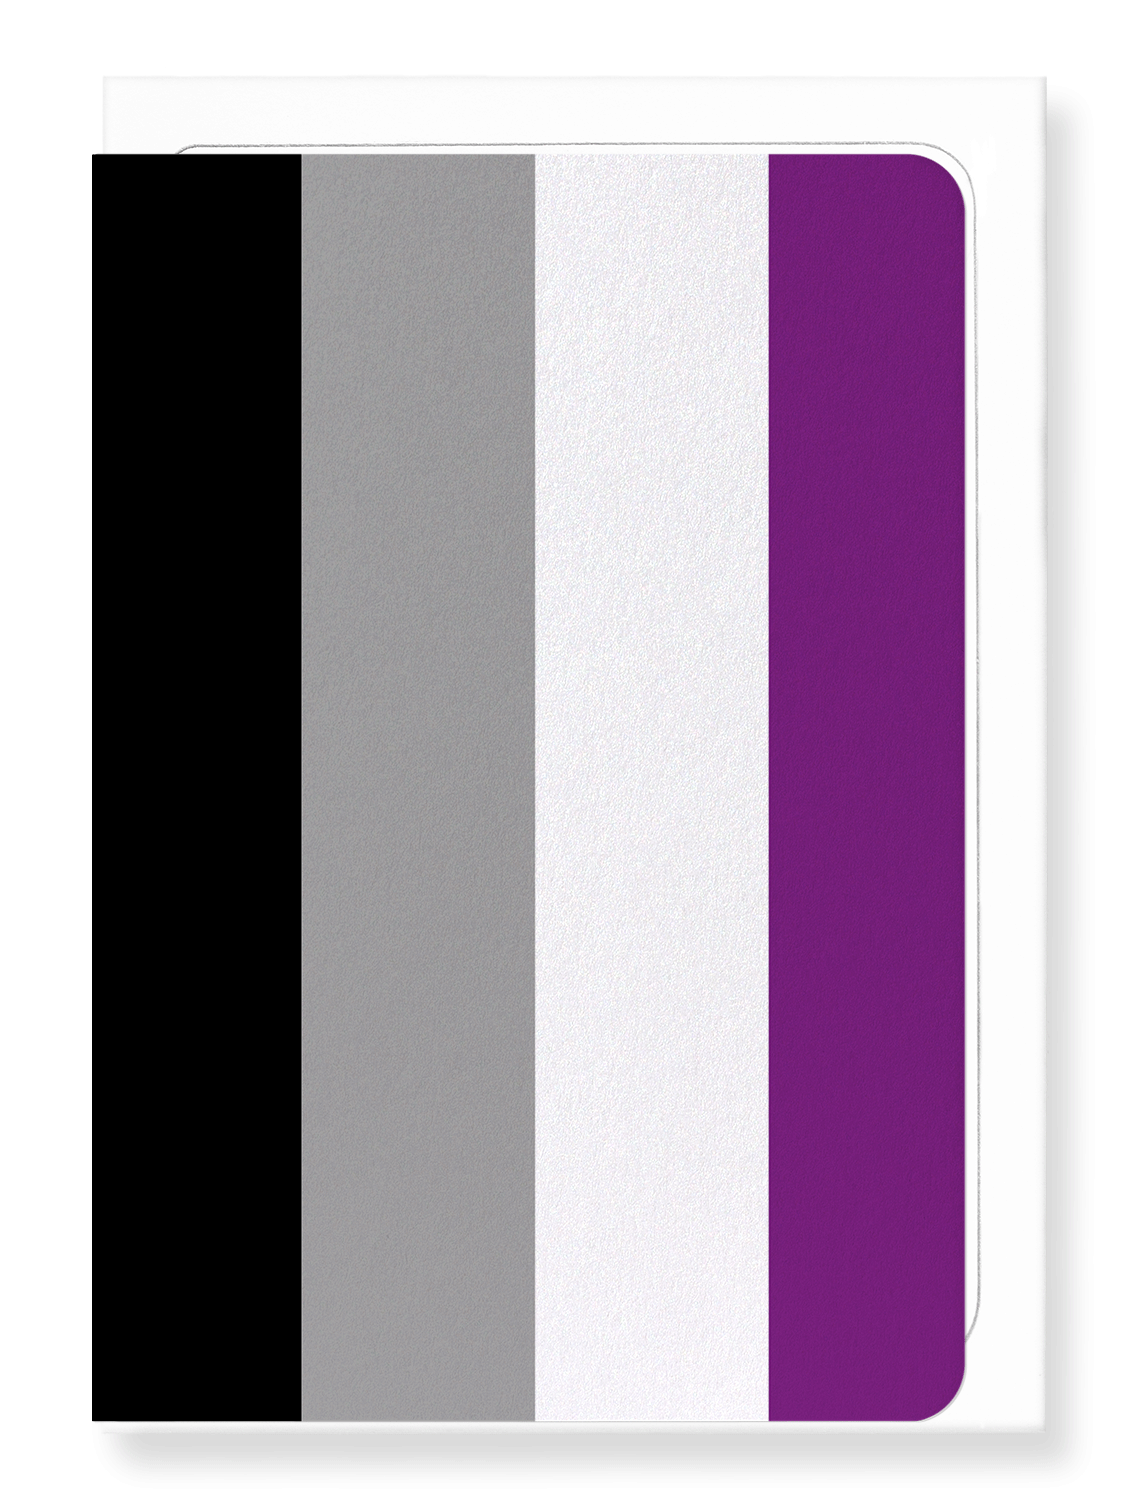 Ezen Designs - Asexual pride flag - Greeting Card - Front